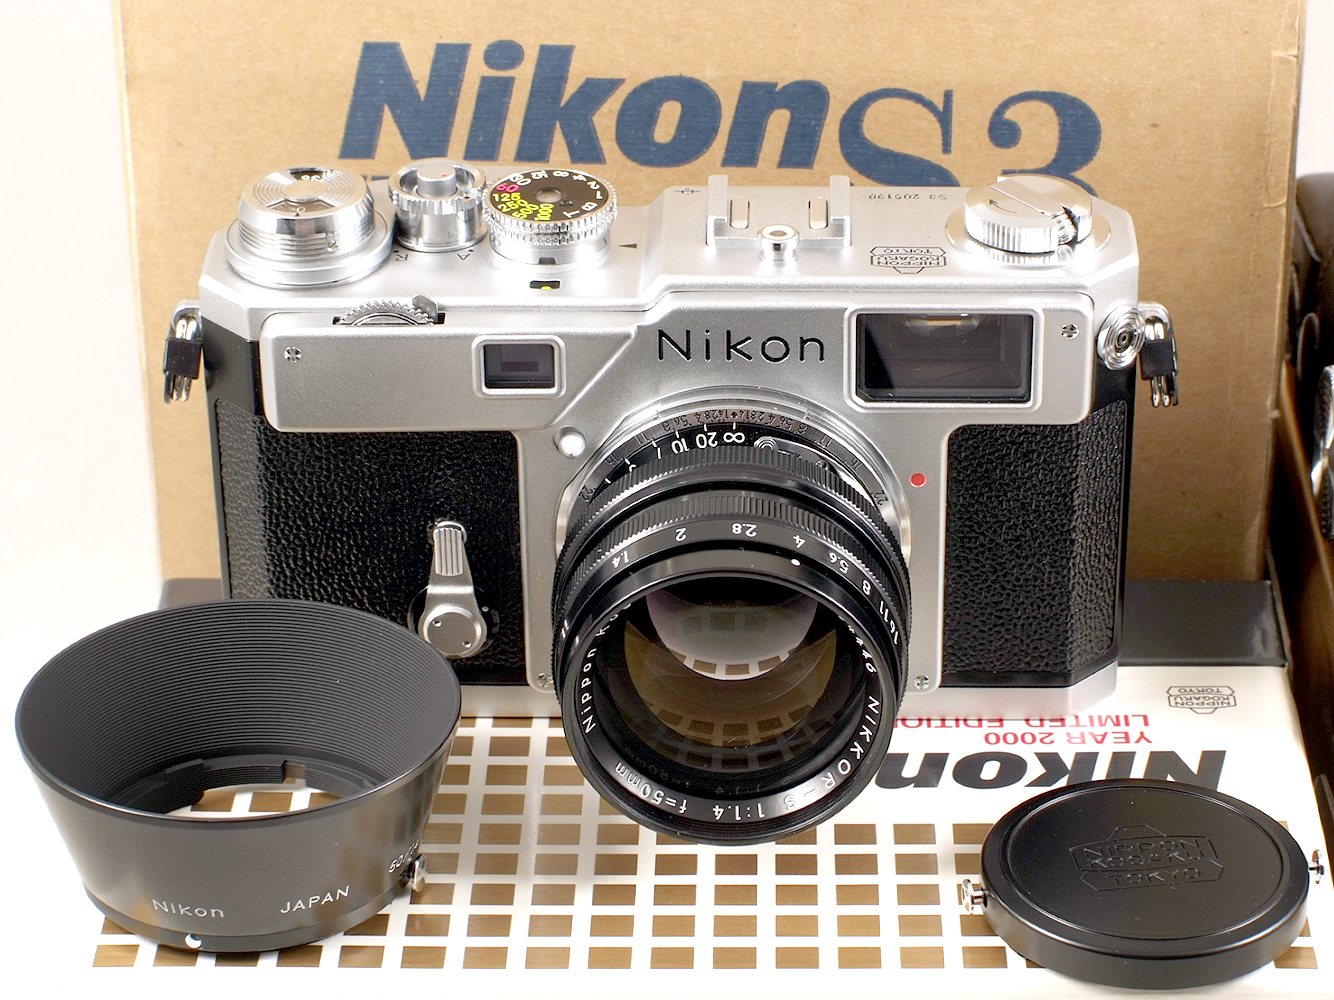 Nikon S3 Year 2000 Millennium Limited Edition Outfit. #205138 (condition 2/3F). With Nikkor f1. - Image 3 of 5